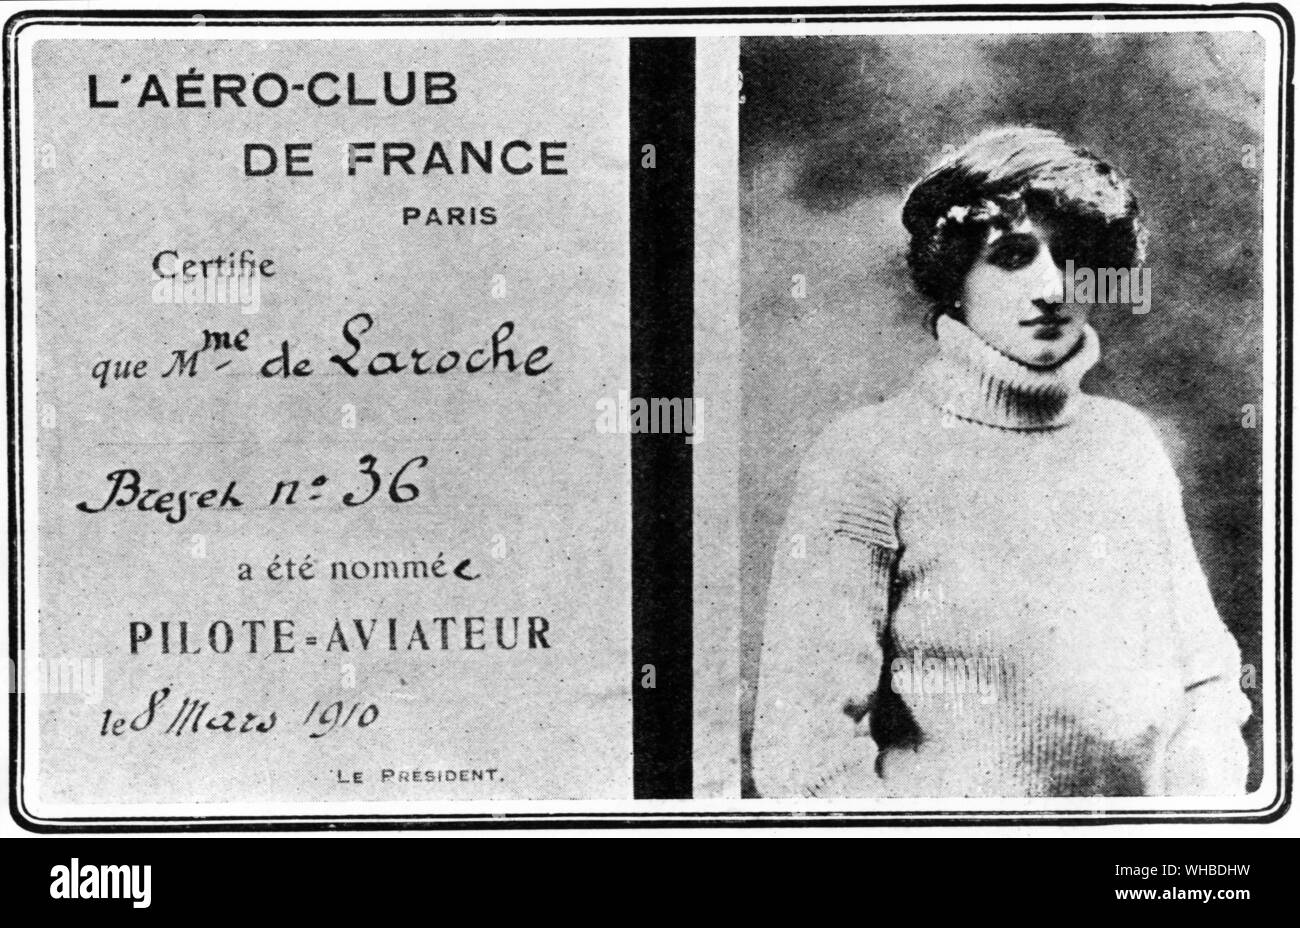 L'Aero-Club de France, Paris - The first official recognition of flying woman: Mme. de Laroche's certificate as pilote aviateur - the first granted to a woman.. Stock Photo